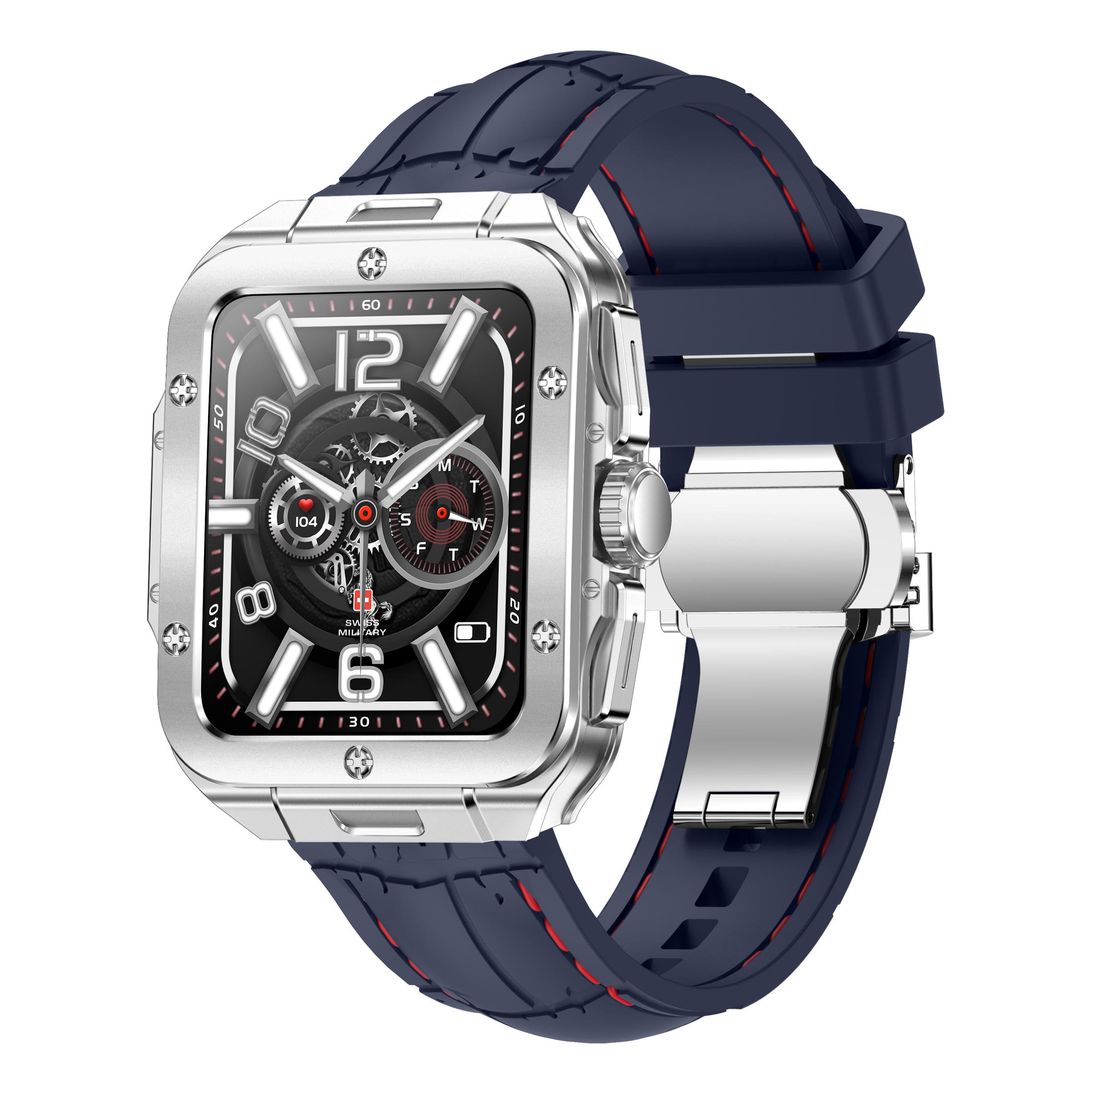 Swiss Military Alps 2 Smartwatch with Silver Frame and Blue Silicon Strap